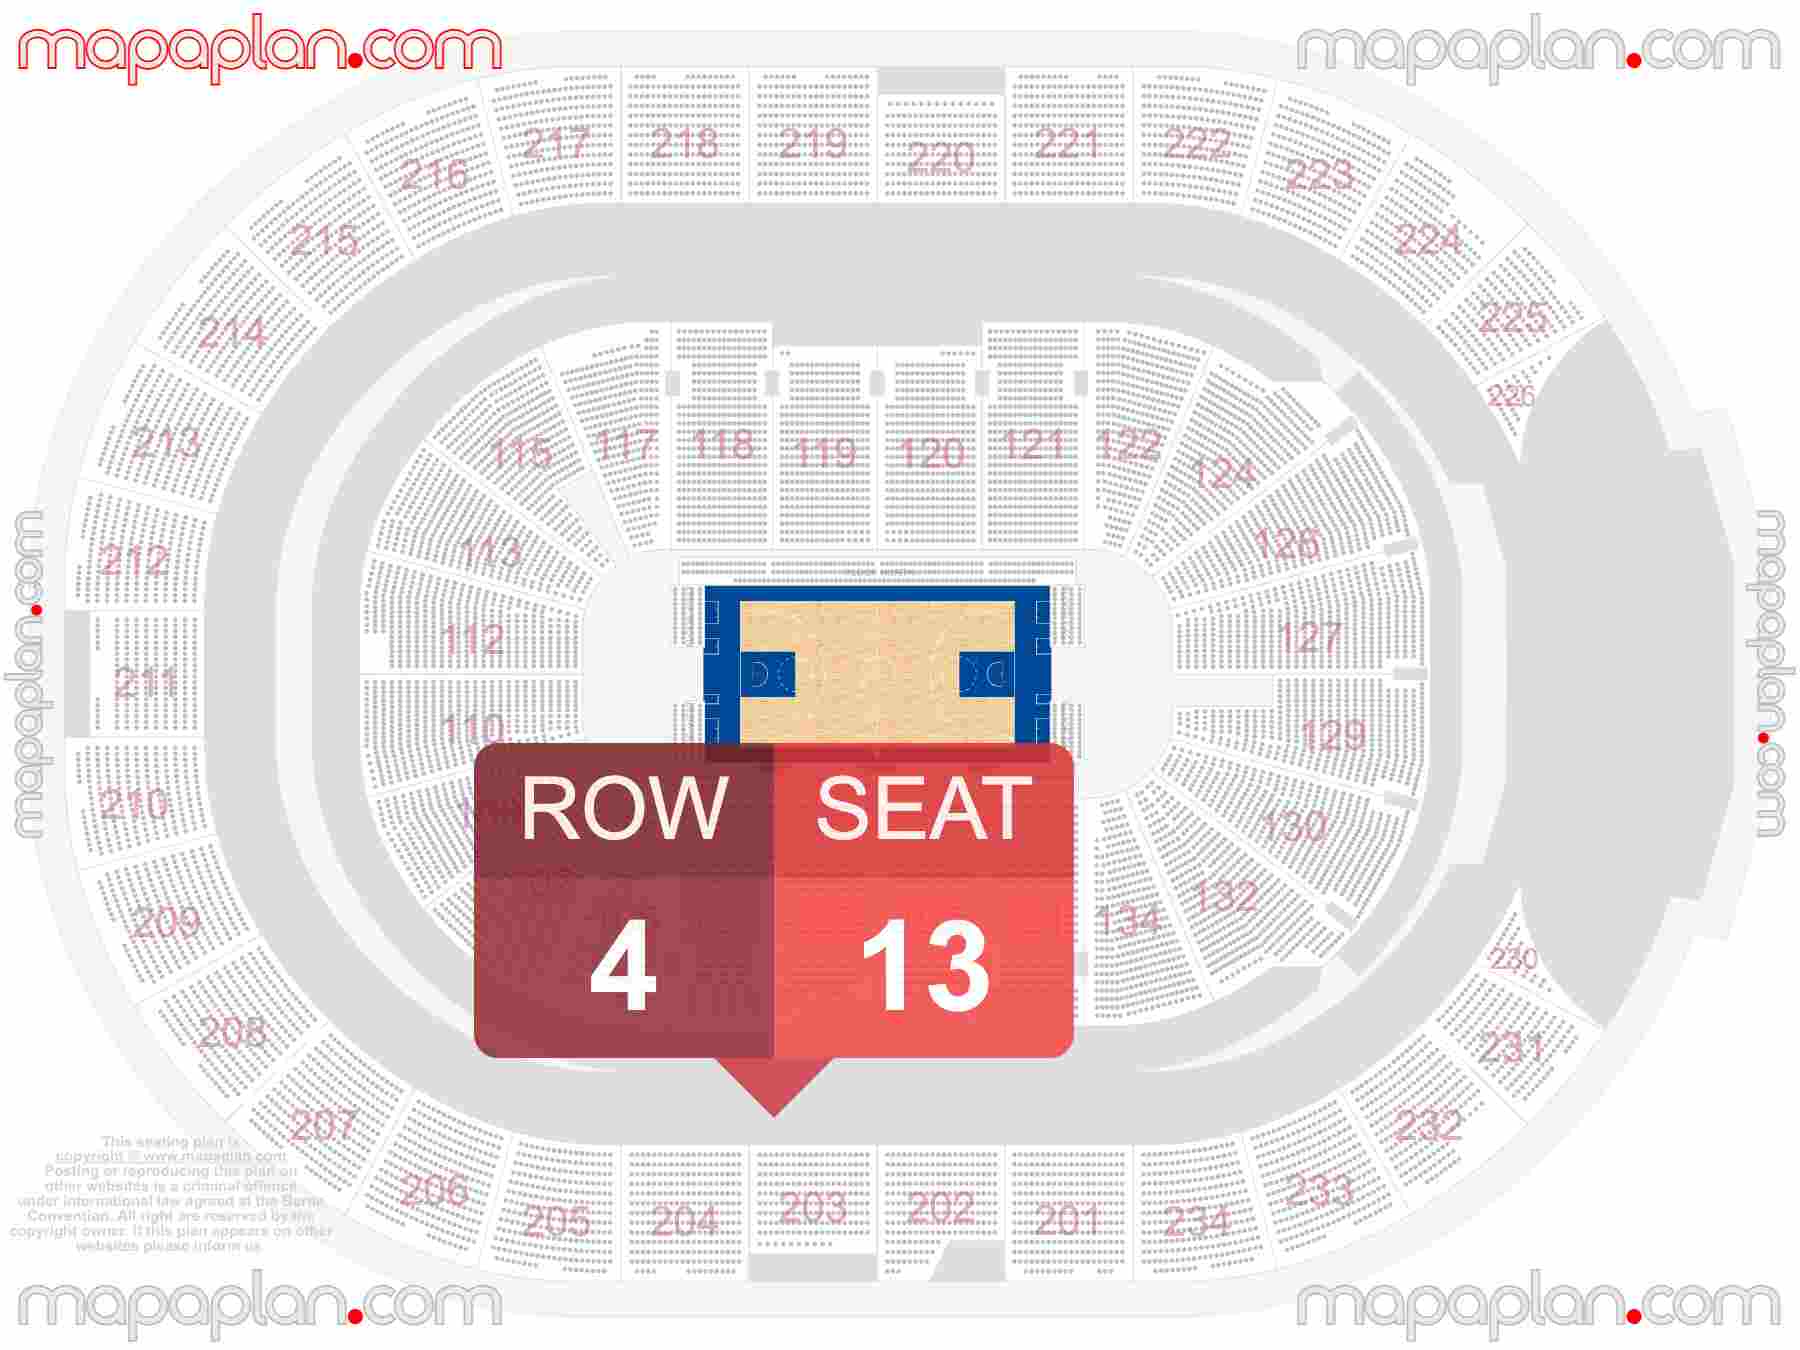 Edmonton Rogers Place seating map Basketball find best seats row numbering system chart showing how many seats per row - Individual 'find my seat' virtual locator